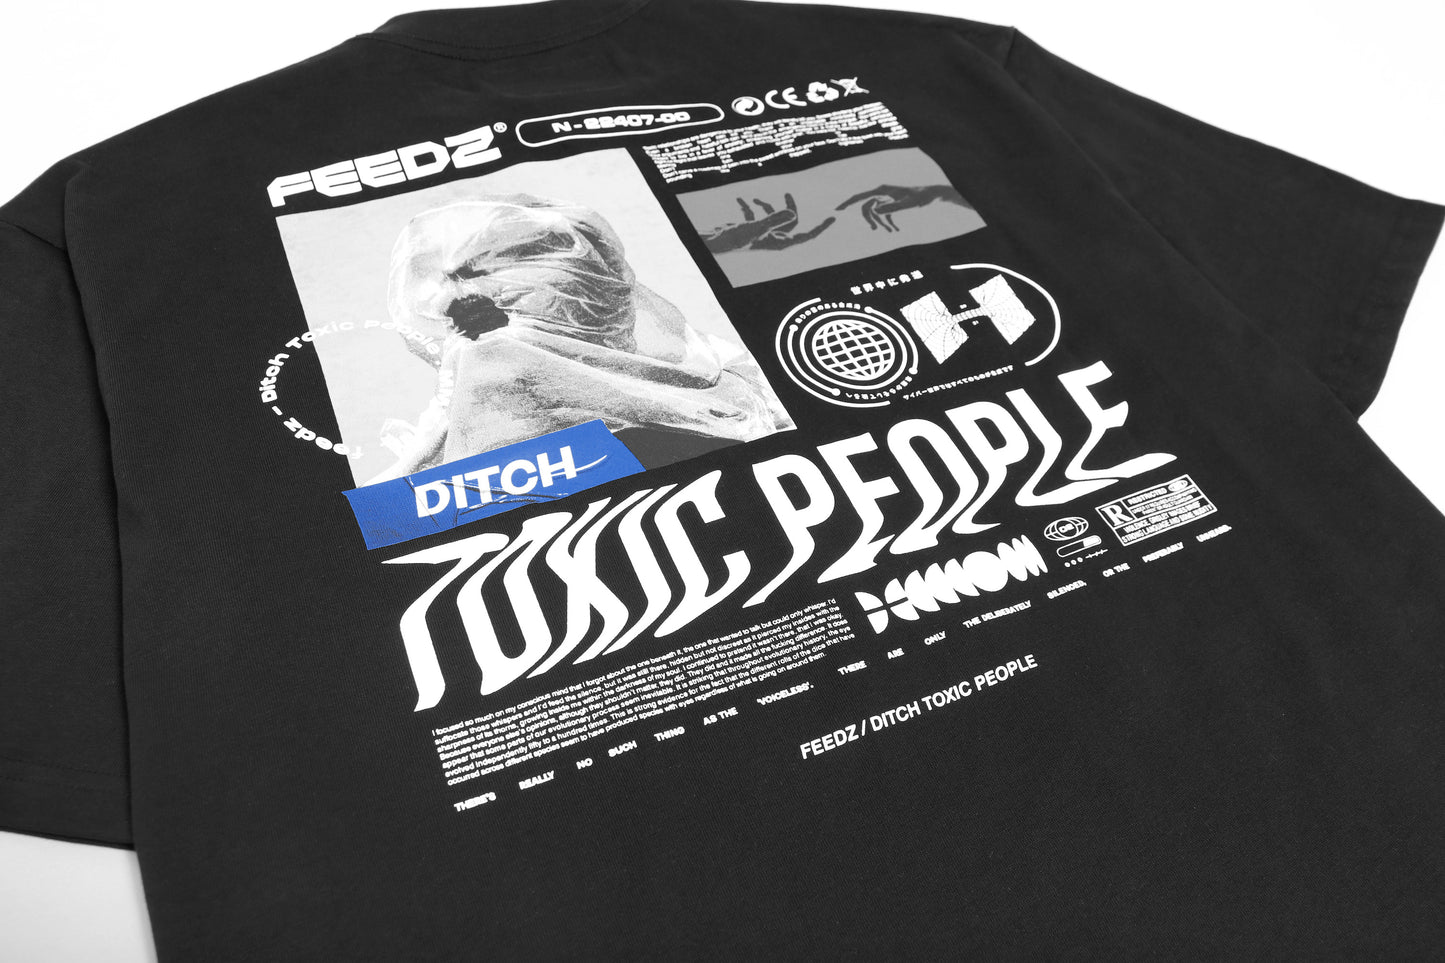 Ditch Toxic people  -  Black